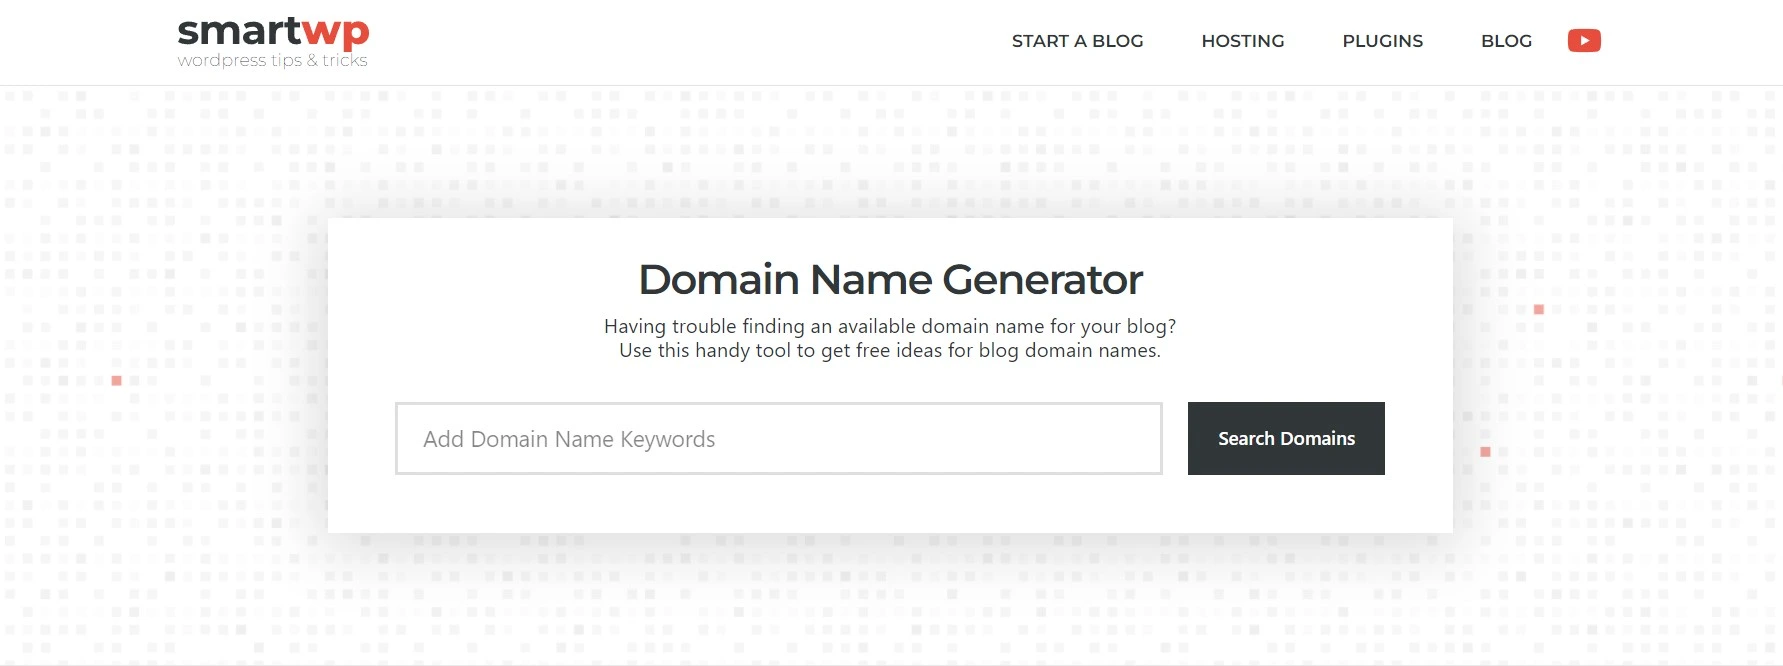 Smartwp Domain Name Generator For Your Business